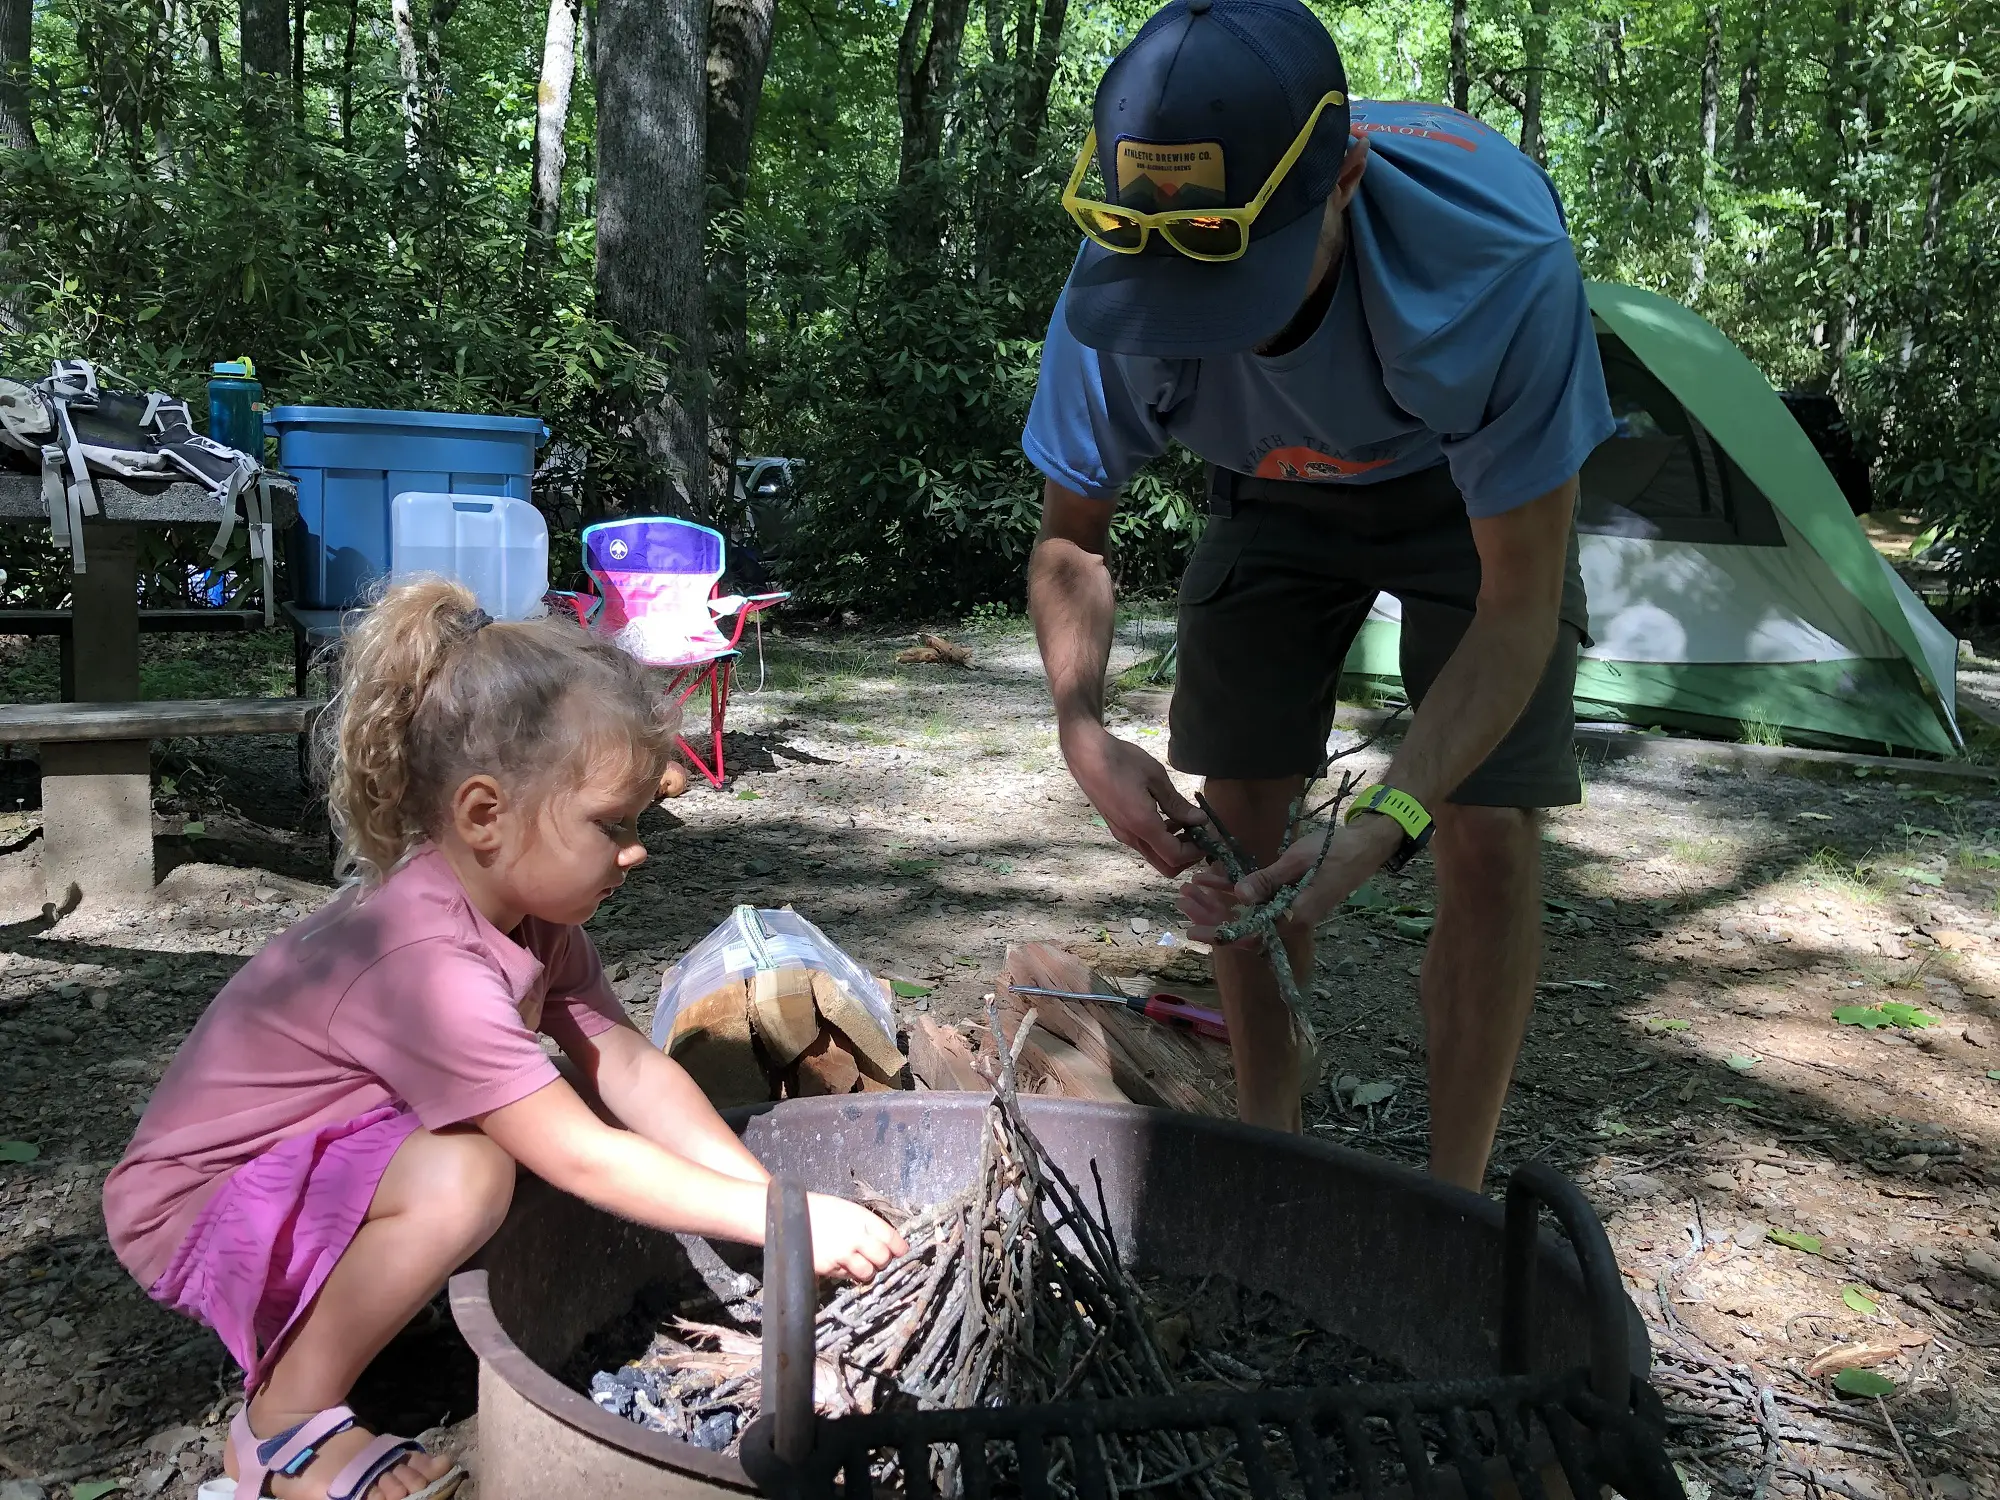 Going camping with kids in Boone NC